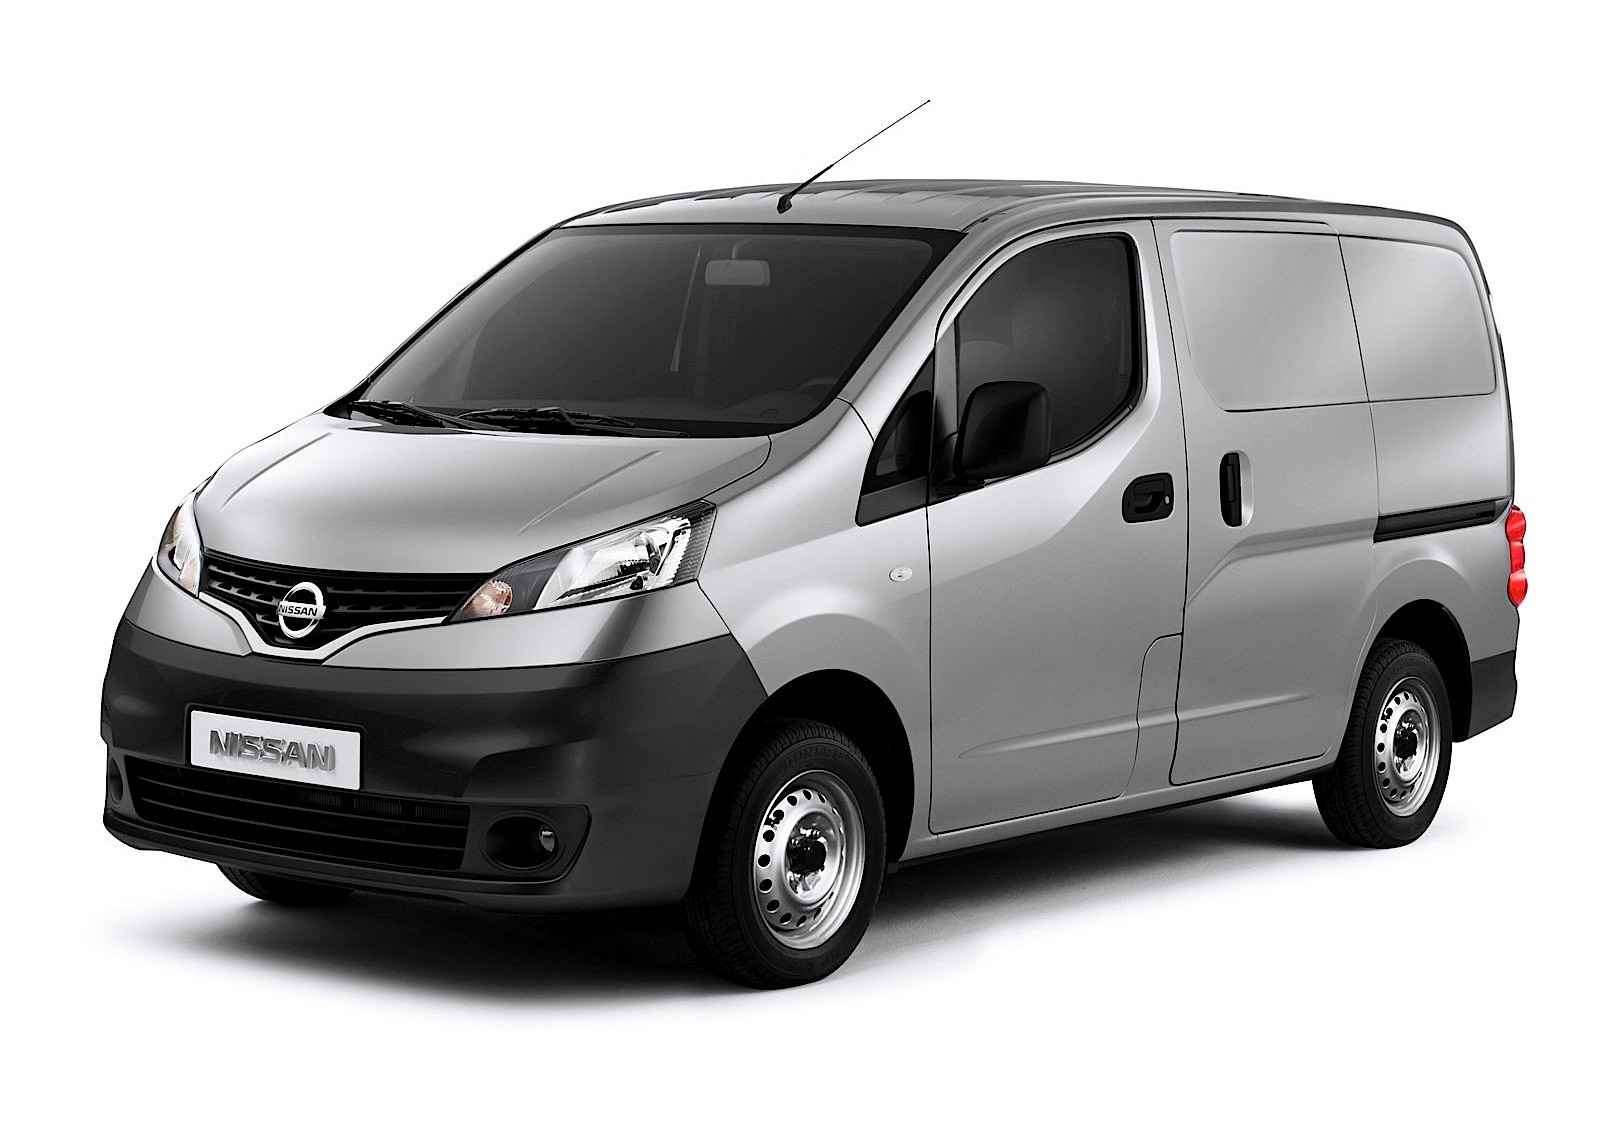 2021 Nissan NV200 Compact Cargo Interior Dimensions: Seating, Cargo Space &  Trunk Size - Photos